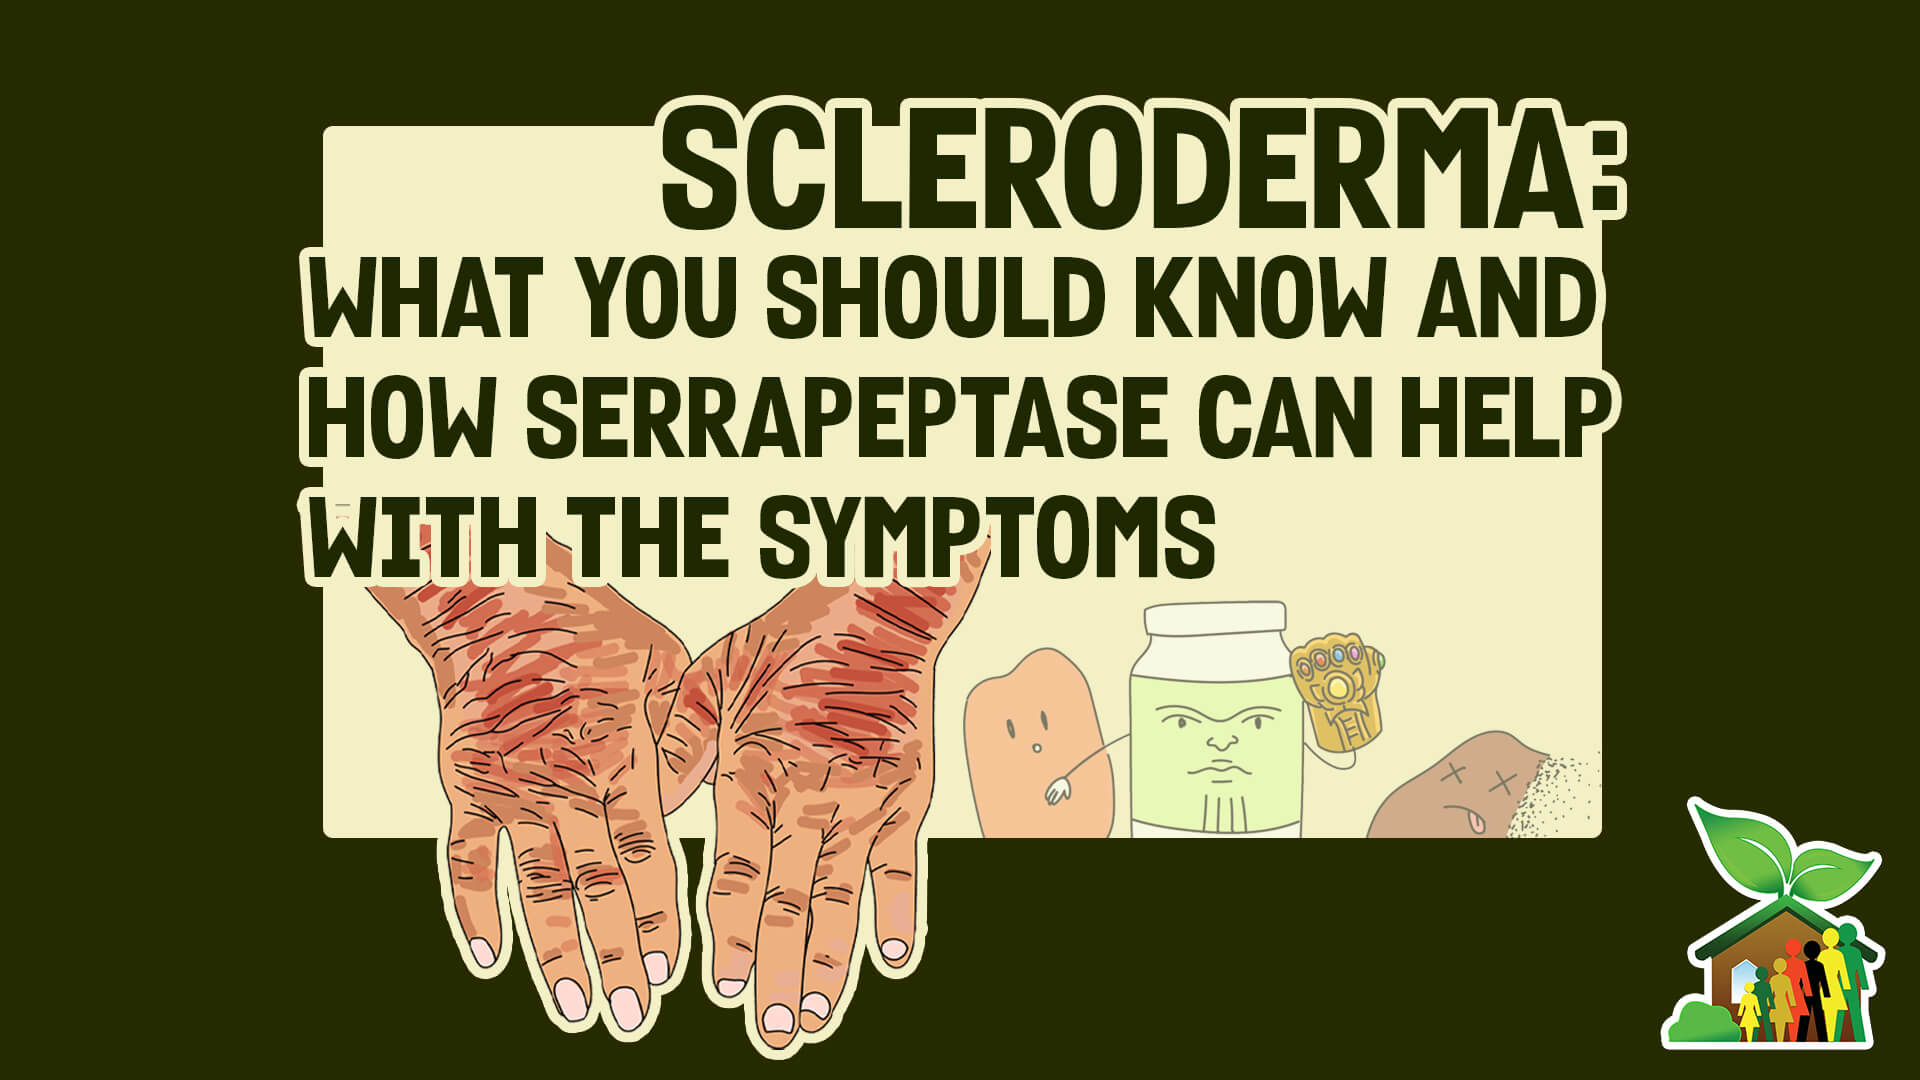 Scleroderma: What You Should Know And How Serrapeptase Can Help With The Symptoms